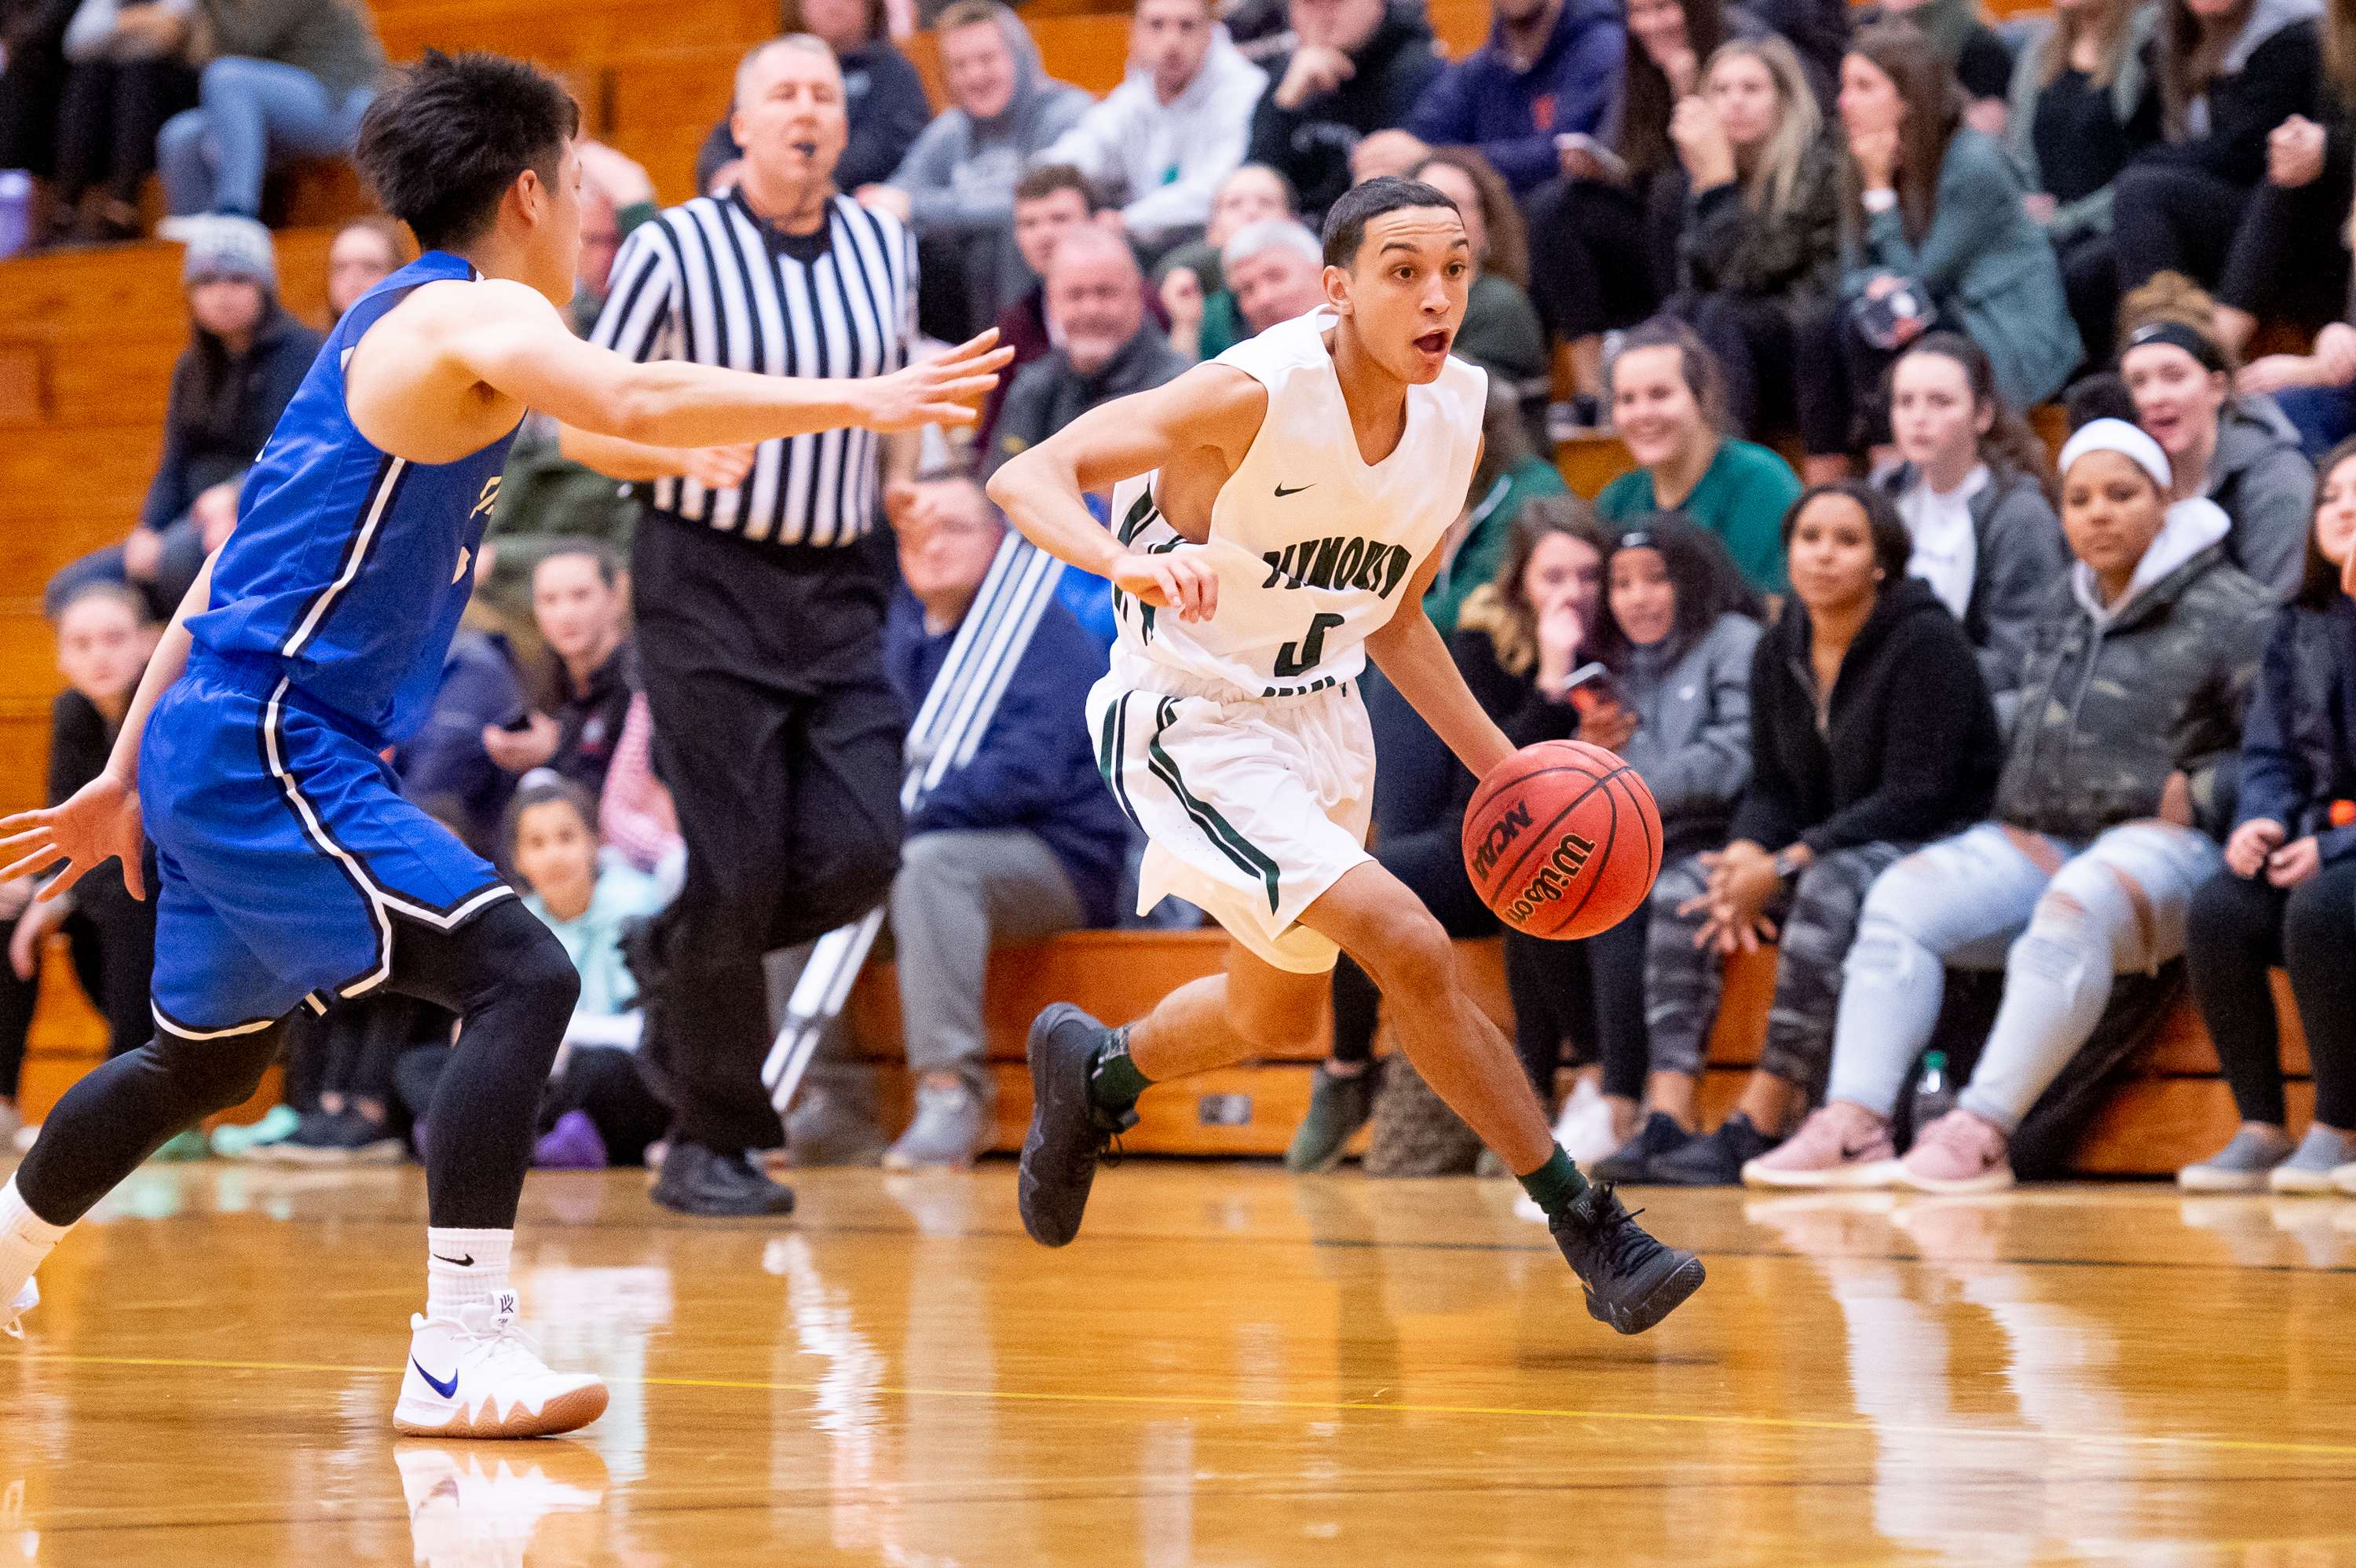 Dante Rivera was voted LEC Rookie of the Year for men’s basketball. He also established a new school record for made three-pointers in a game.